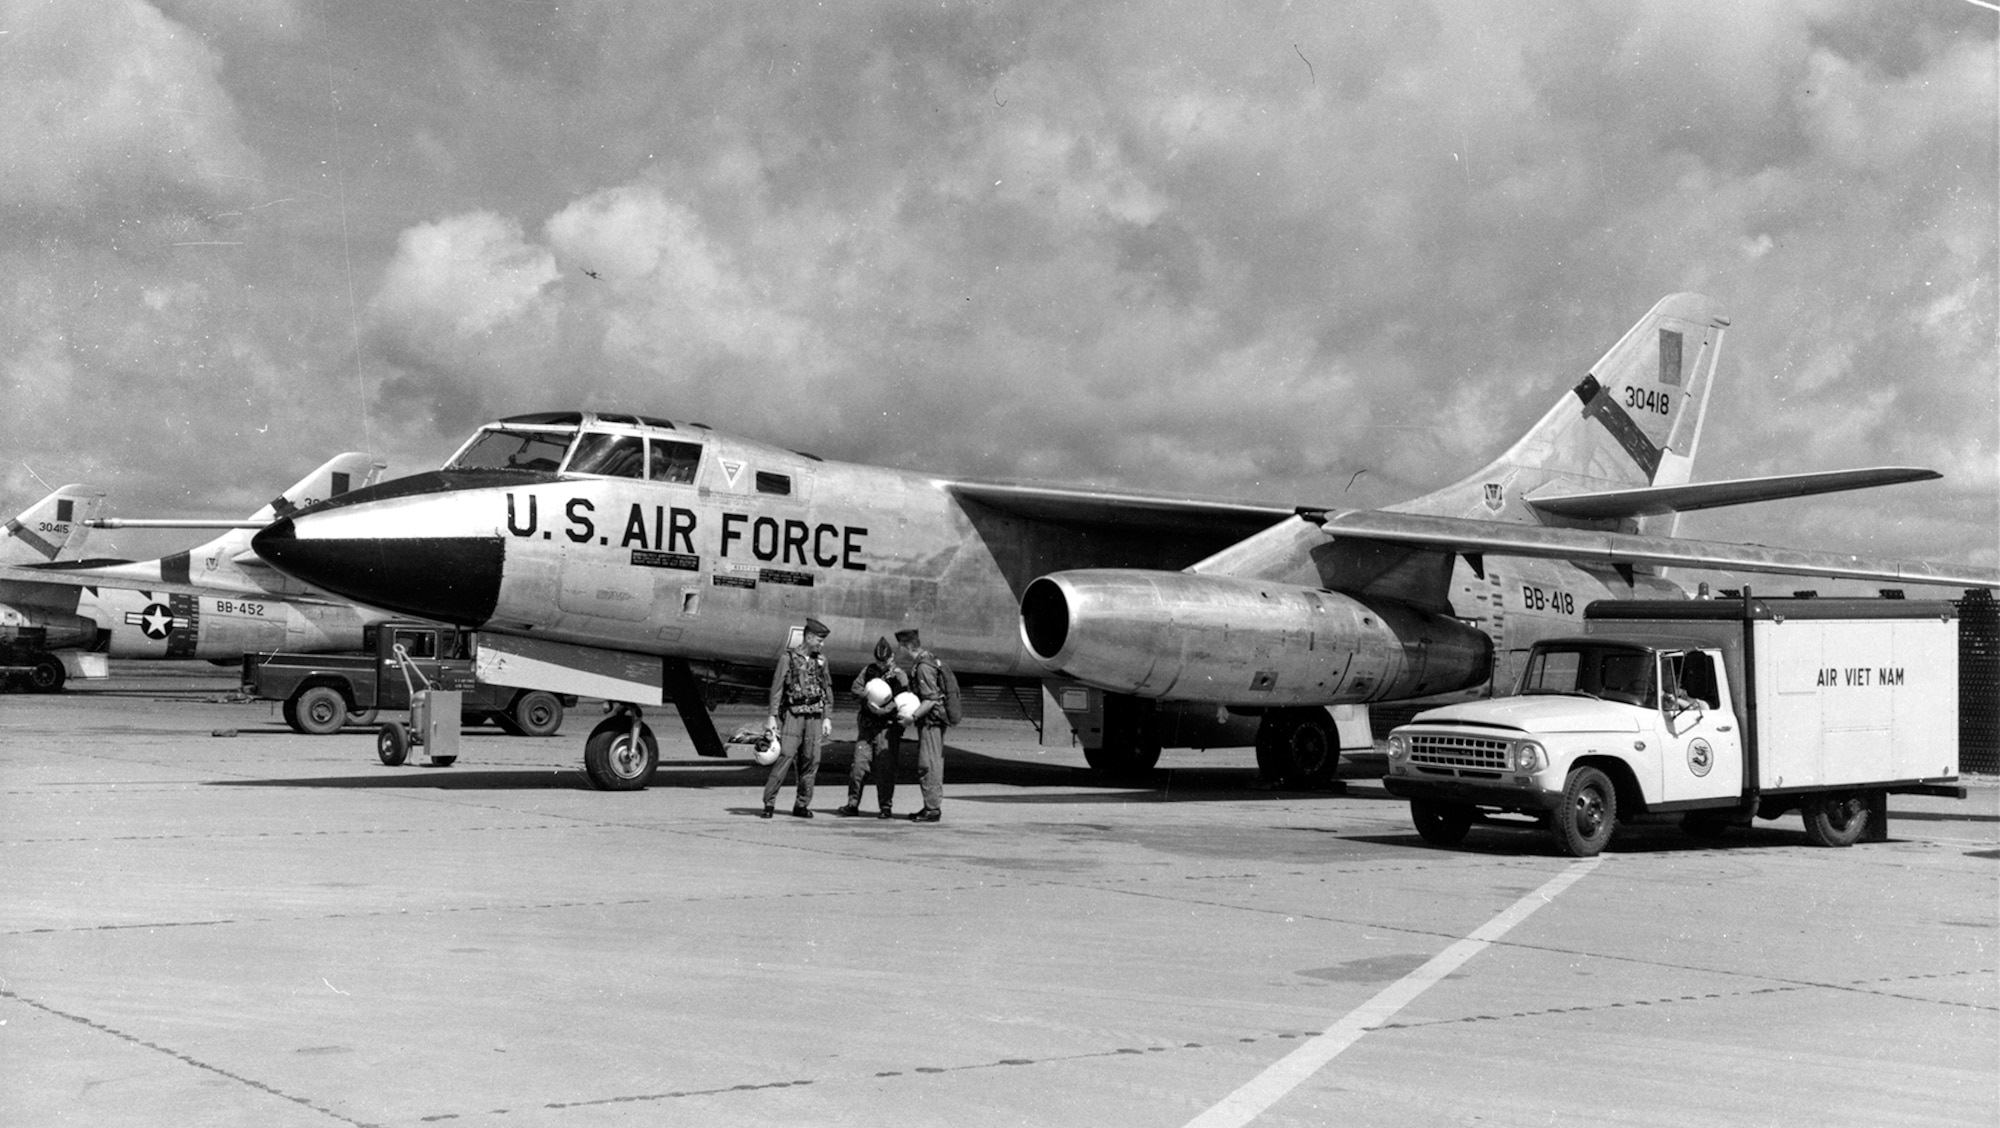 A small number of RB-66Bs -- like the one pictured here at Tan Son Nhut Air Base, South Vietnam -- flew reconnaissance missions in Southeast Asia from 1965-1966. An RB-66B that flew combat missions in Southeast Asia is on display in this gallery. (U.S. Air Force photo)